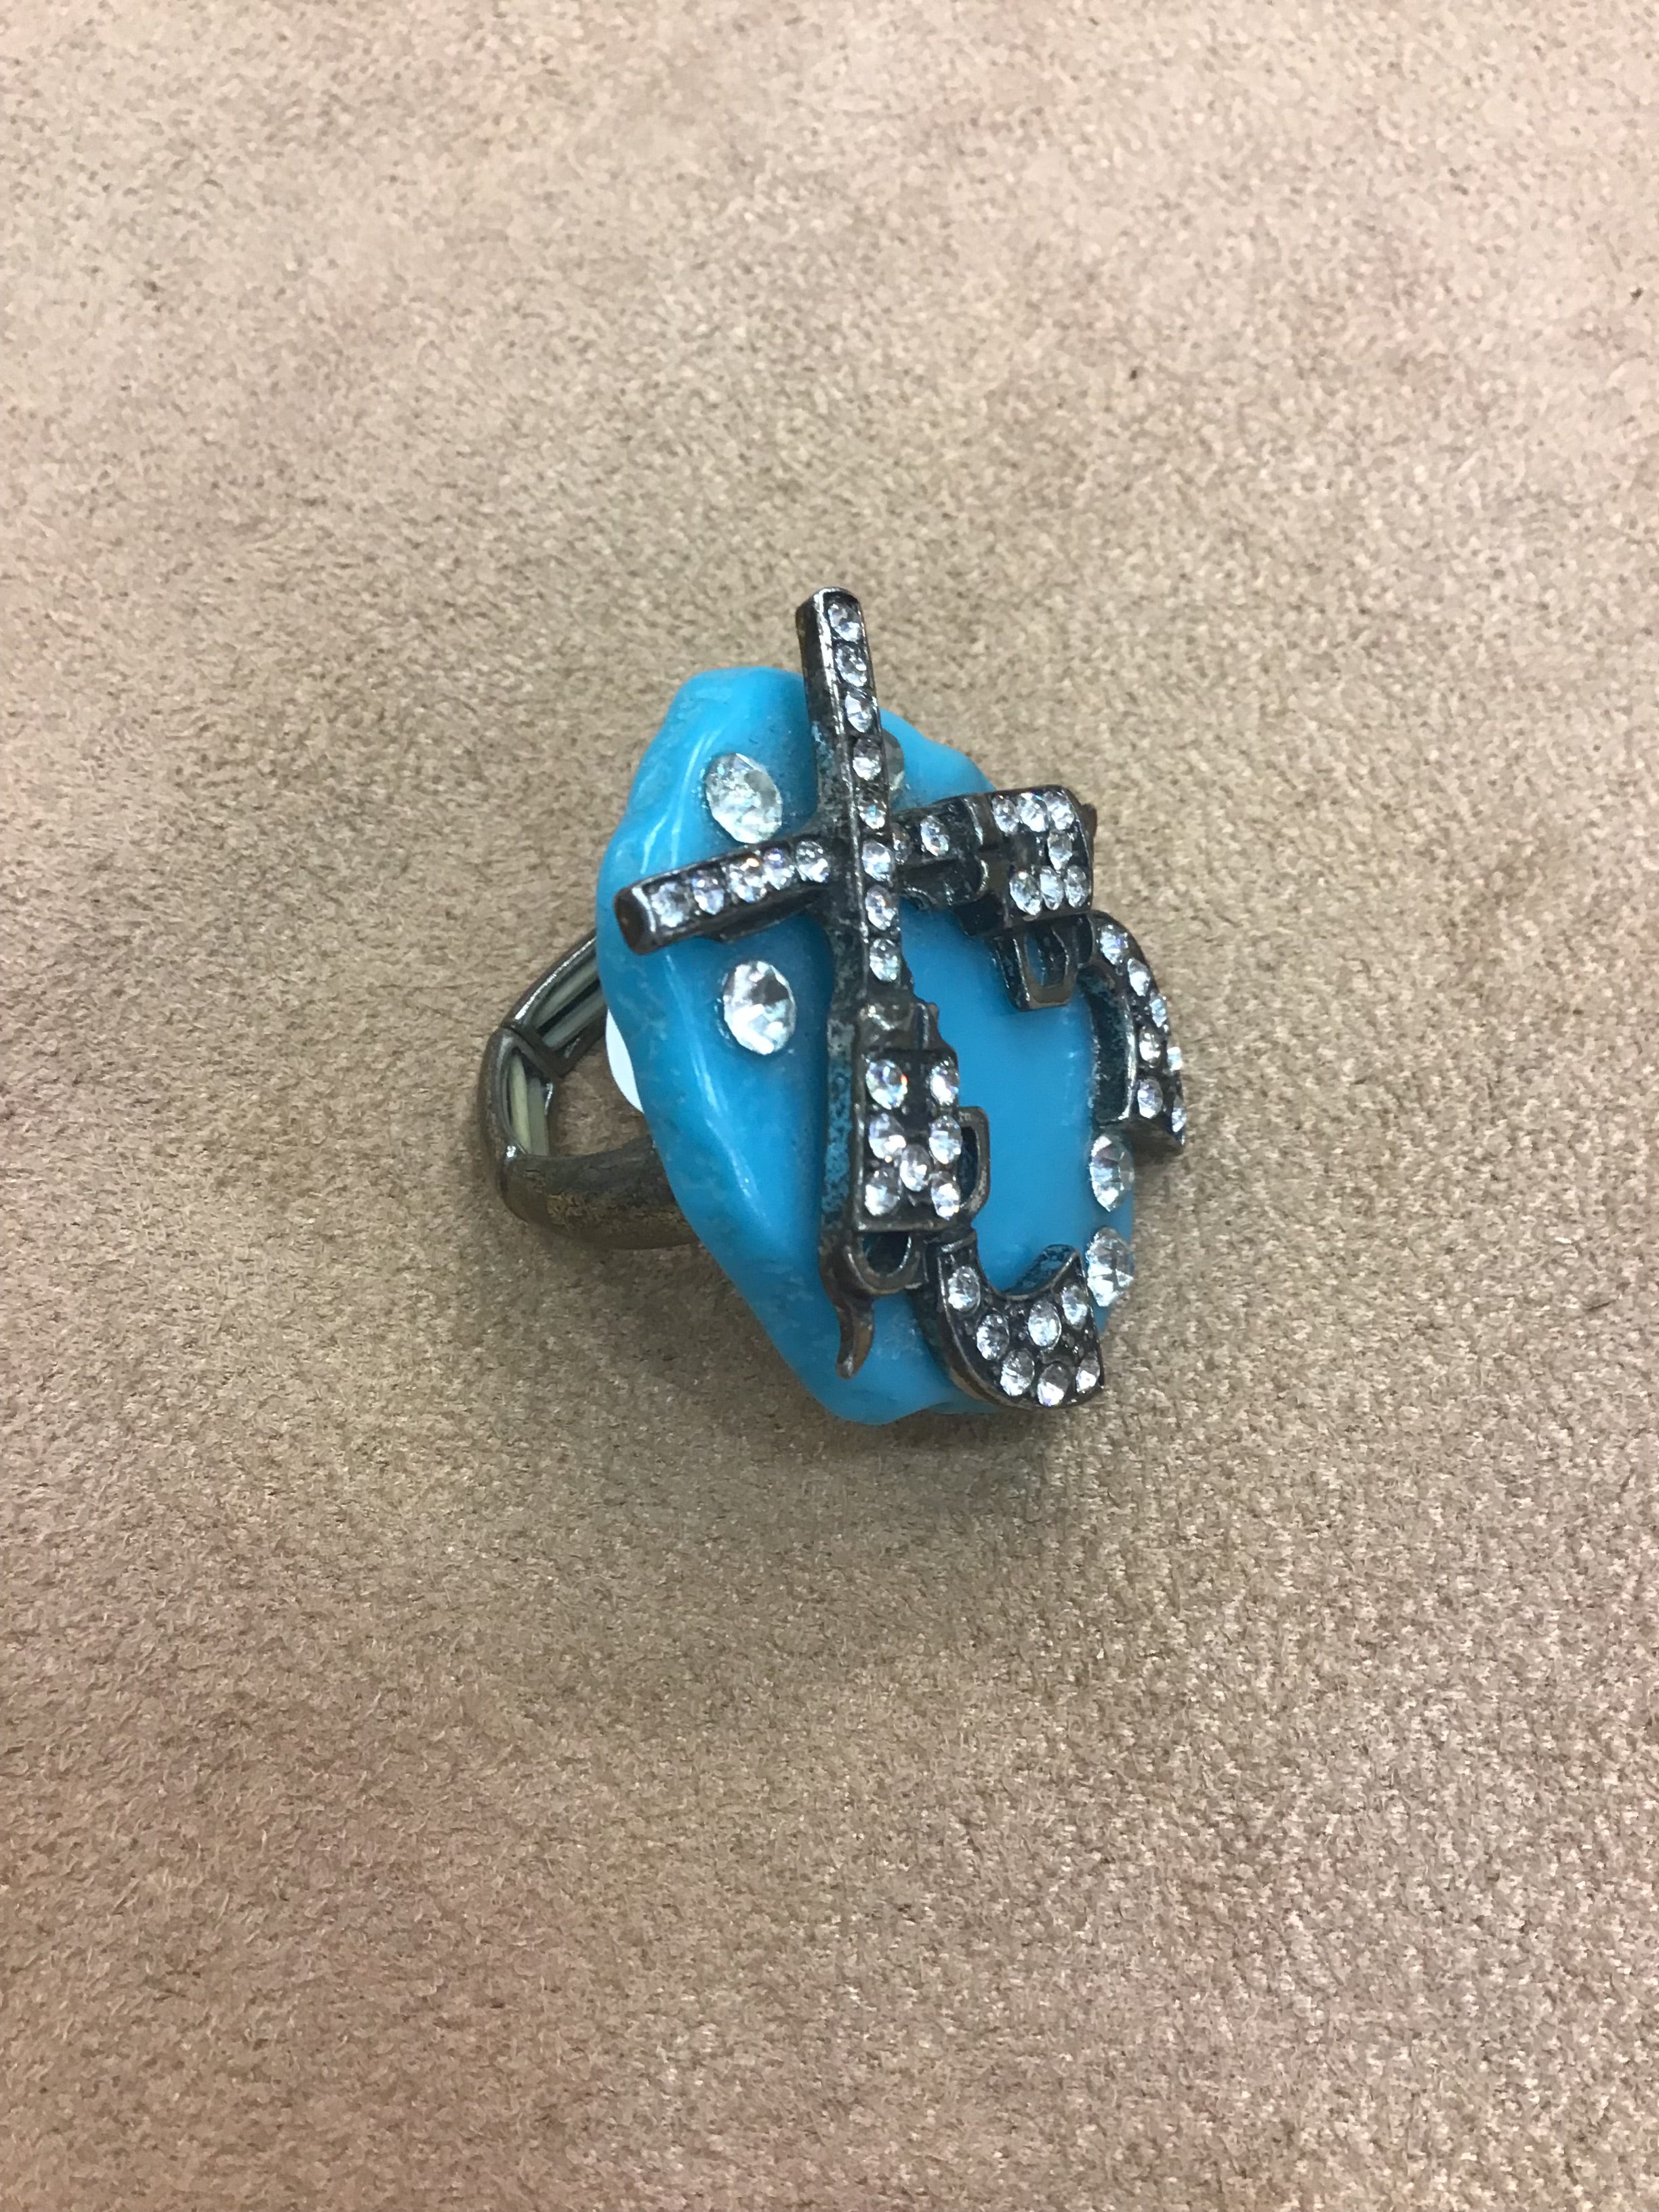 Turquoise Stone Ring With Two Revolvers